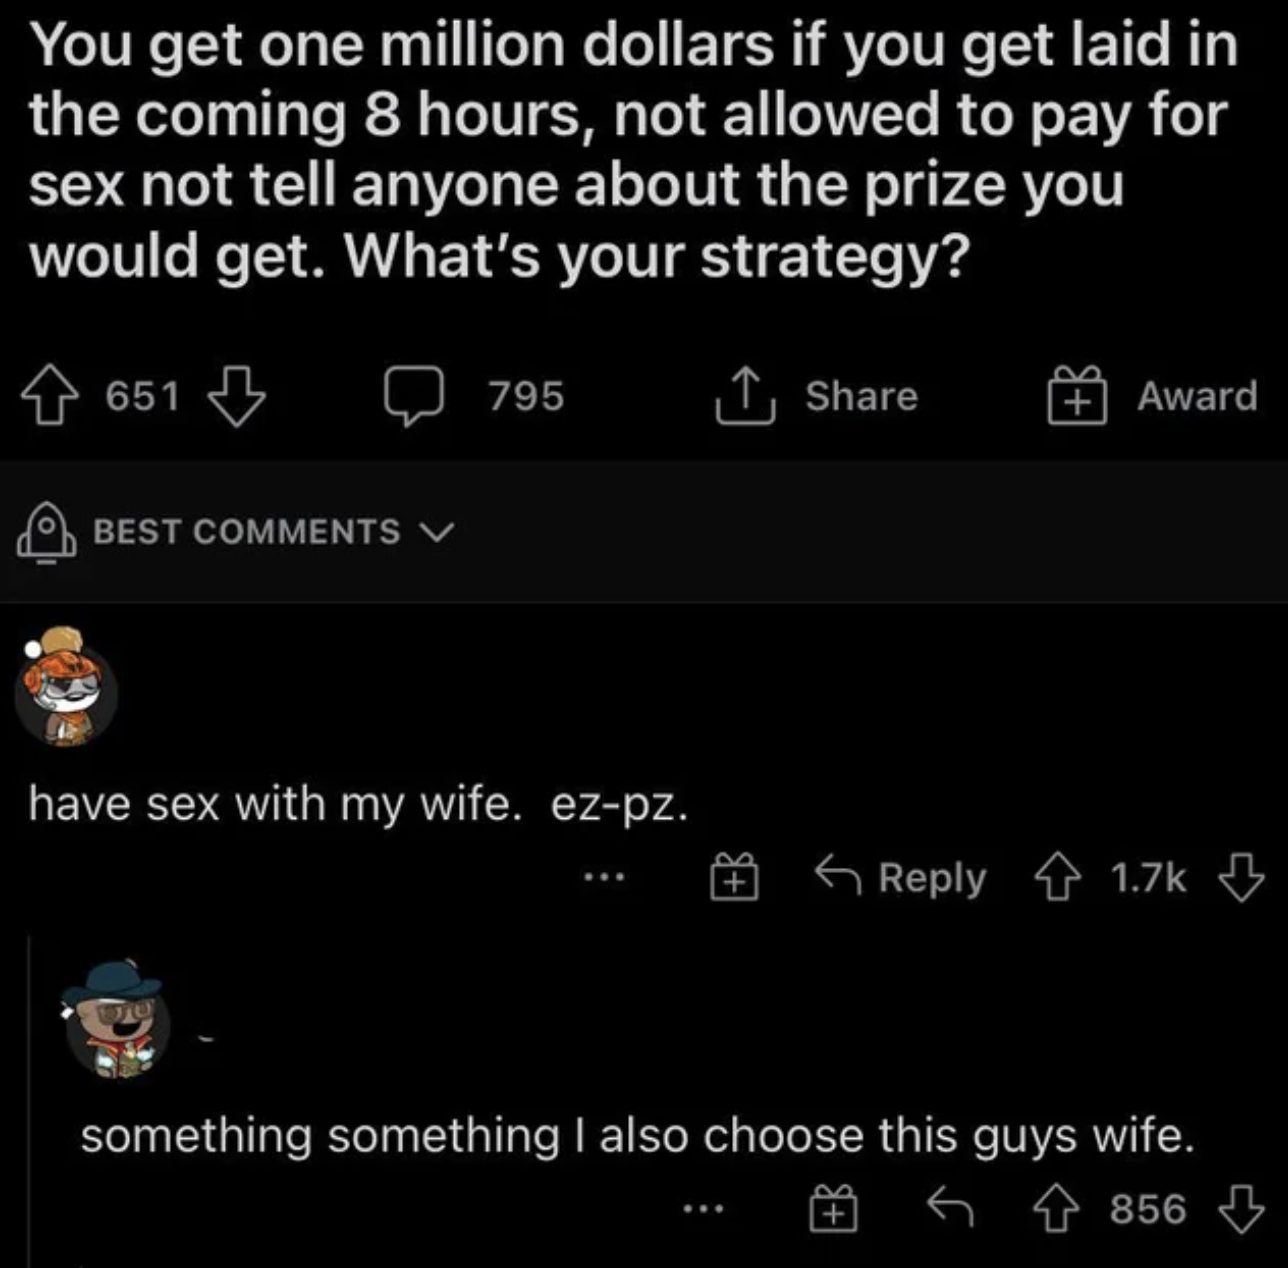 Cursed Comments - questions to ask - You get one million dollars if you get laid in the coming 8 hours, not allowed to pay for sex not tell anyone about the prize you would get. What's your strategy?